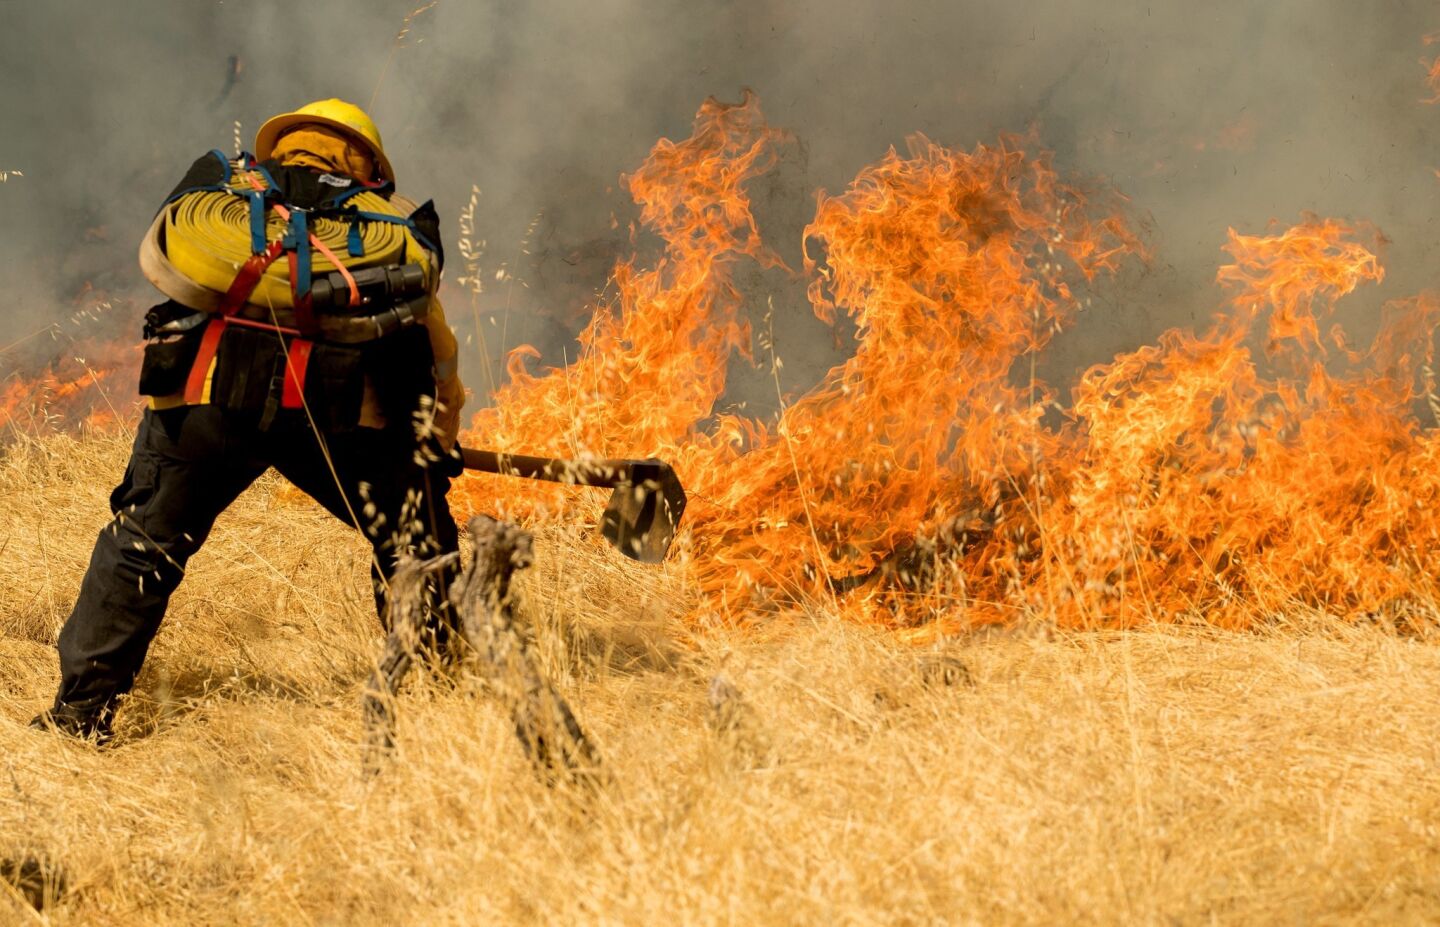 A firefighter works to keep the Detwiller fire from spreading up a hillside near Mariposa on July 17.